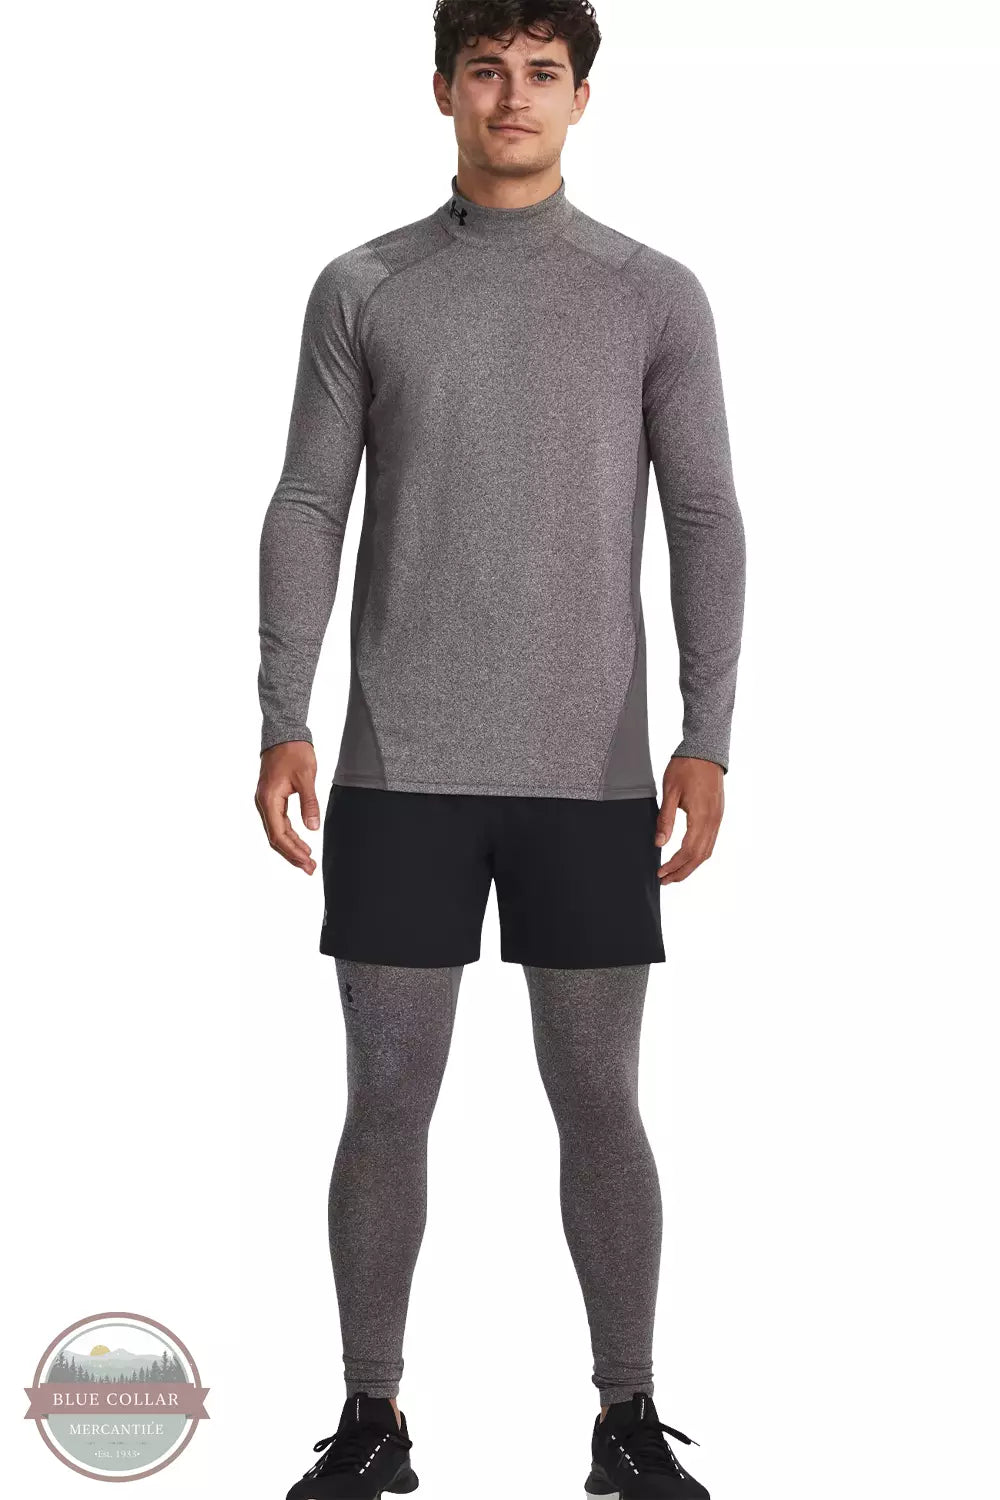 Under Armour 1366075-020 ColdGear Leggings Heather Charcoal Light Black in 